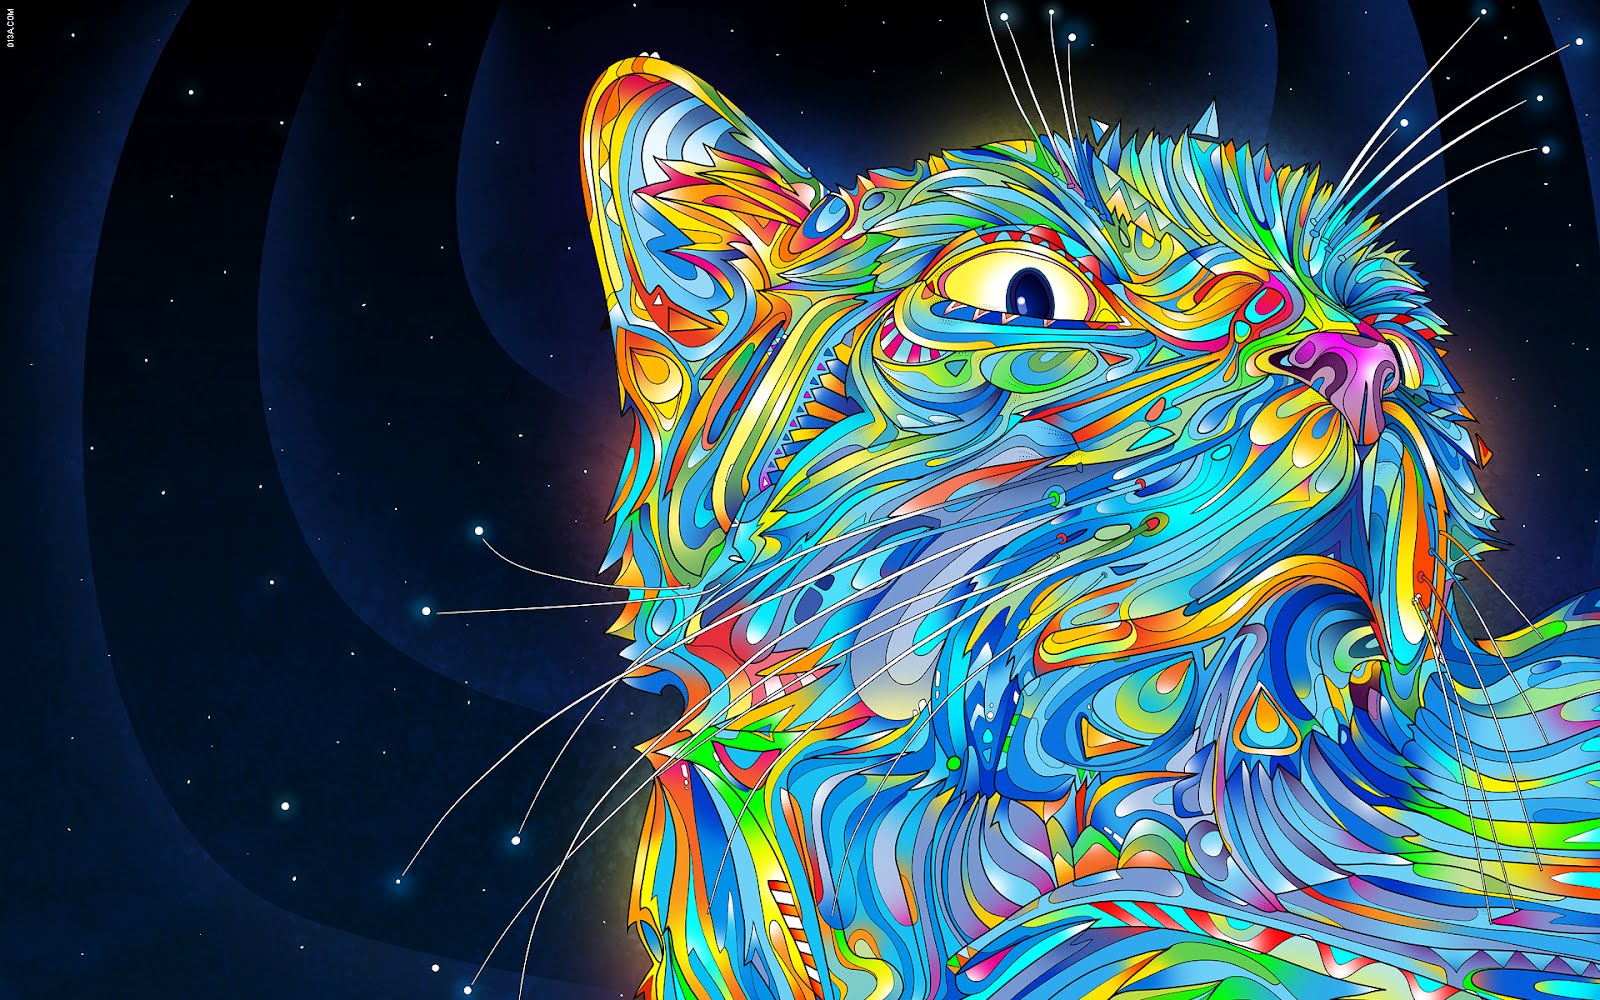 Trippy Backgrounds Hd 16001000 125061 HD Wallpaper Res 1600x1000 1600x1000